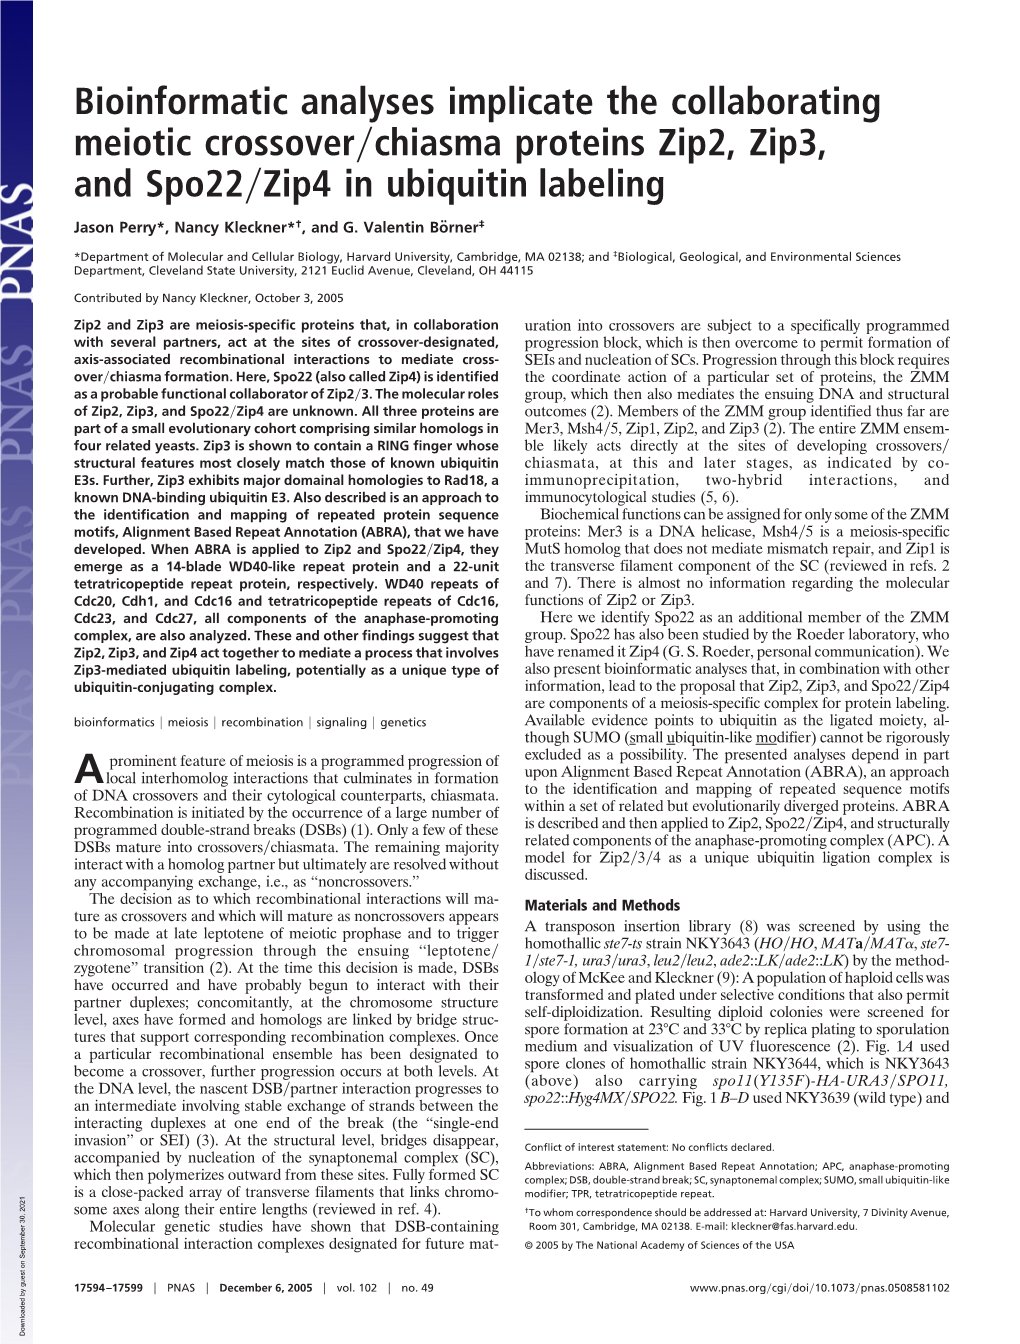 Bioinformatic Analyses Implicate the Collaborating Meiotic Crossover͞chiasma Proteins Zip2, Zip3, and Spo22͞zip4 in Ubiquitin Labeling